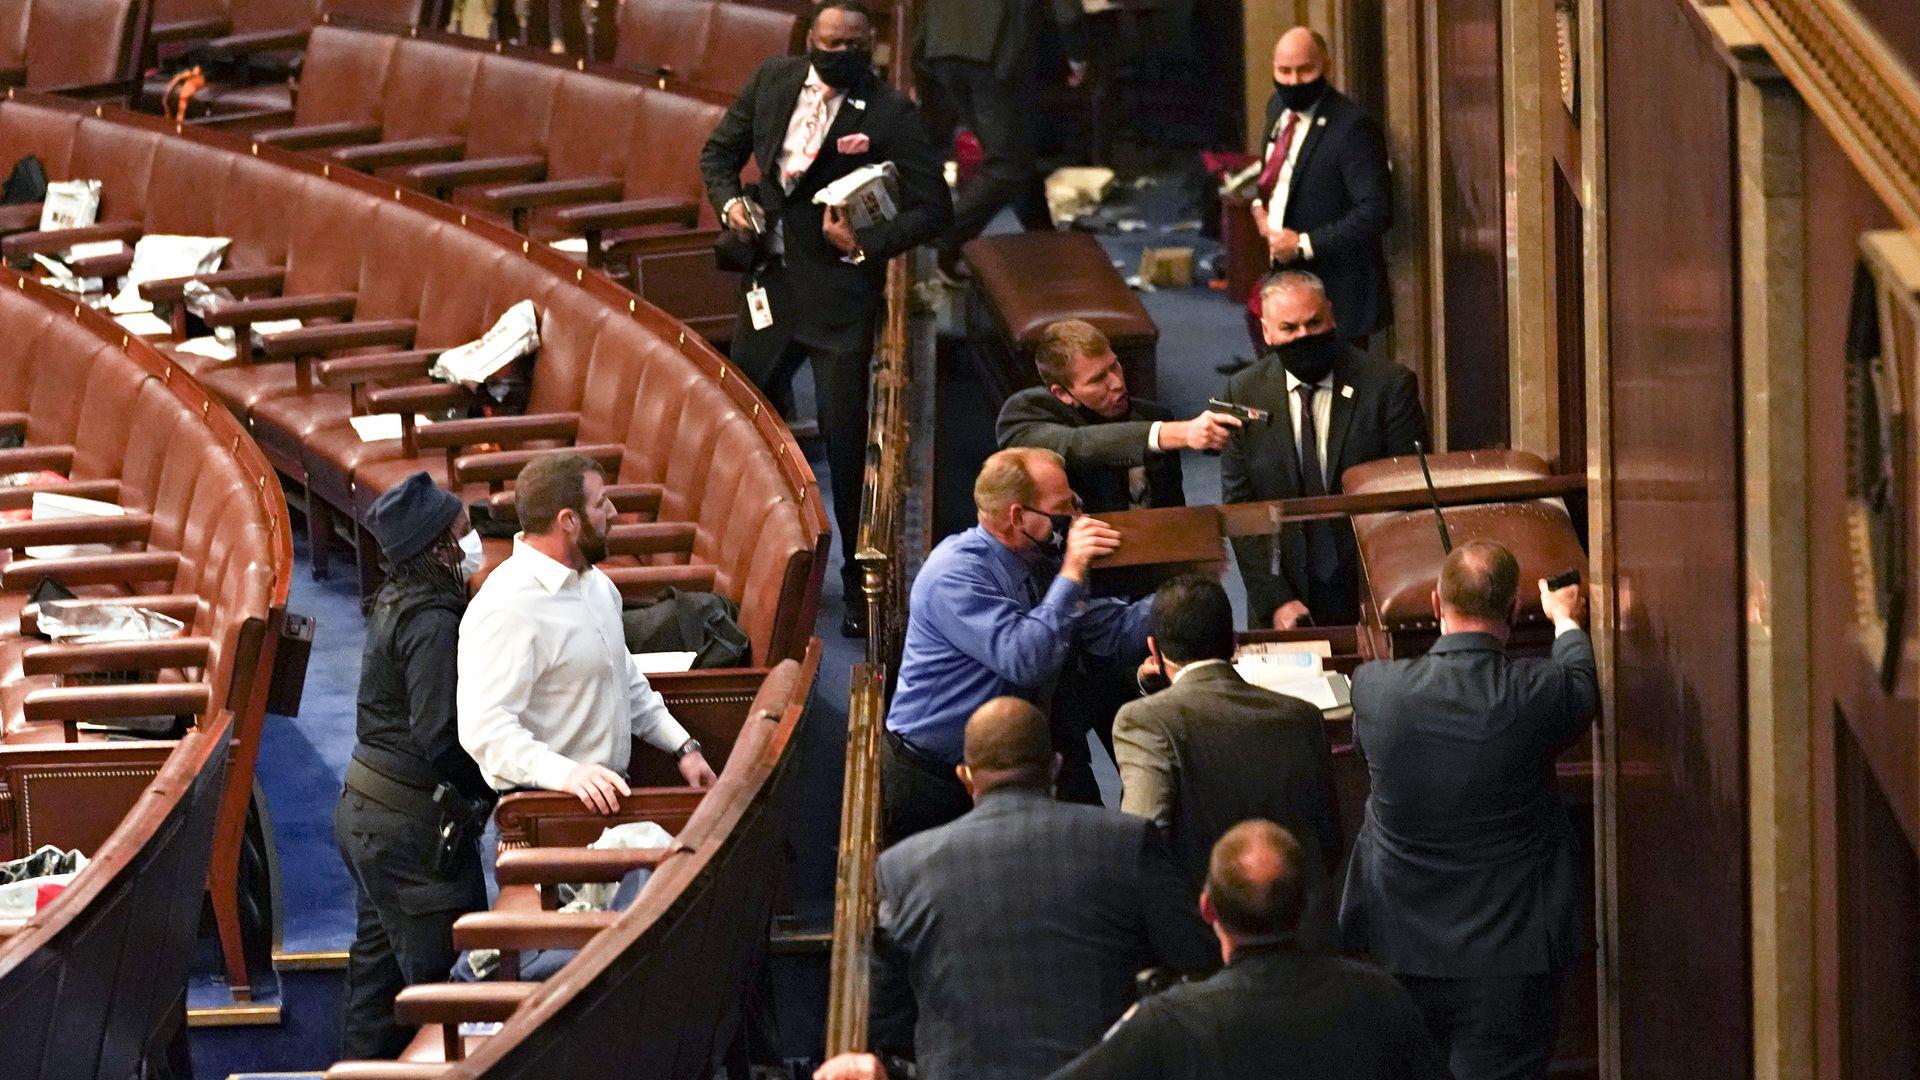 Members of the Capitol Police are seen pointing guns at the door of the House Chamber as rioters stand outside on Jan. 6, 2021.